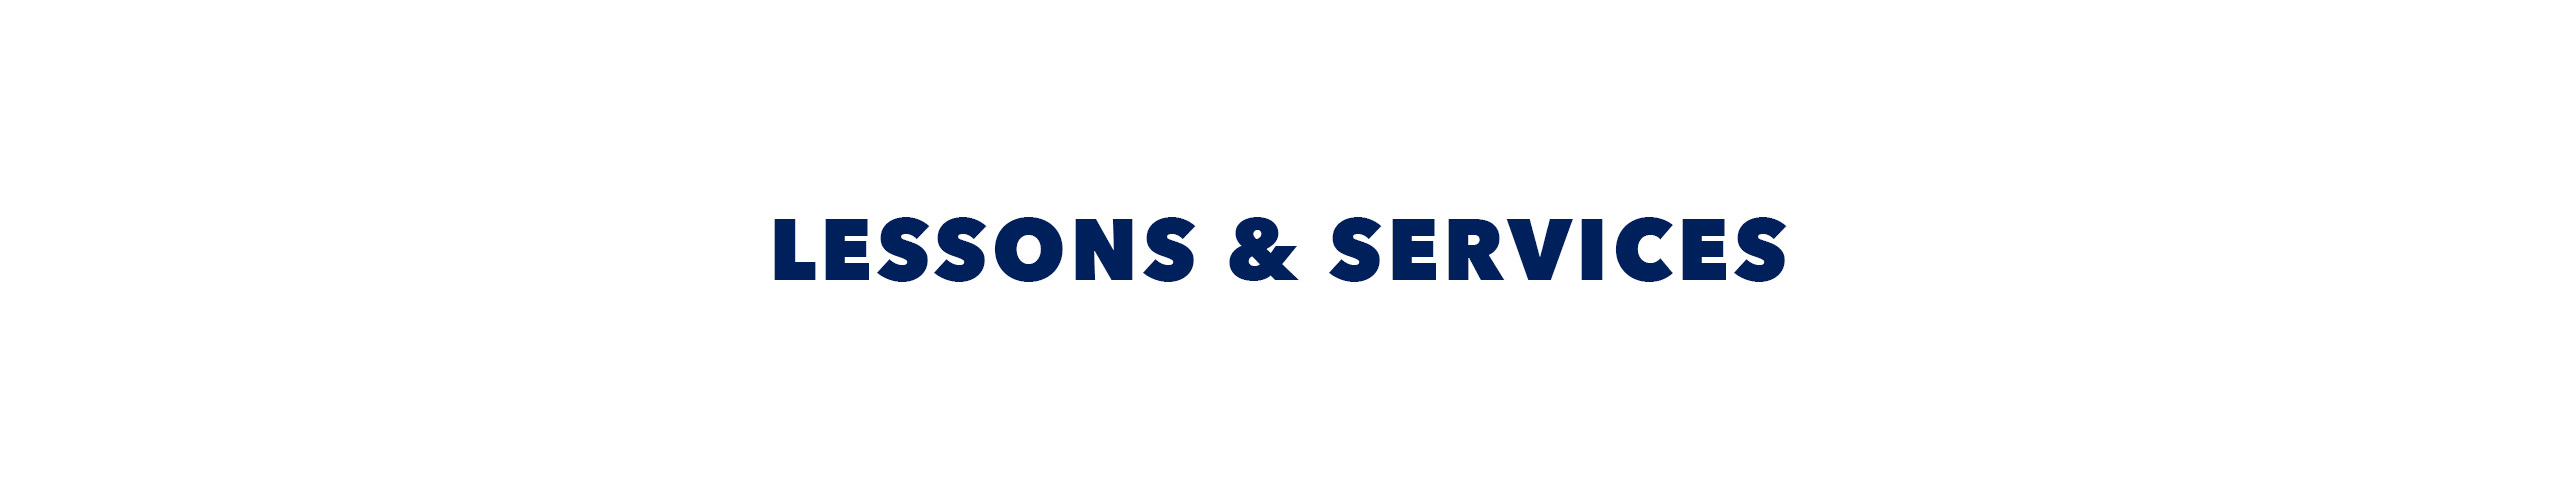 Lessons and Services Header